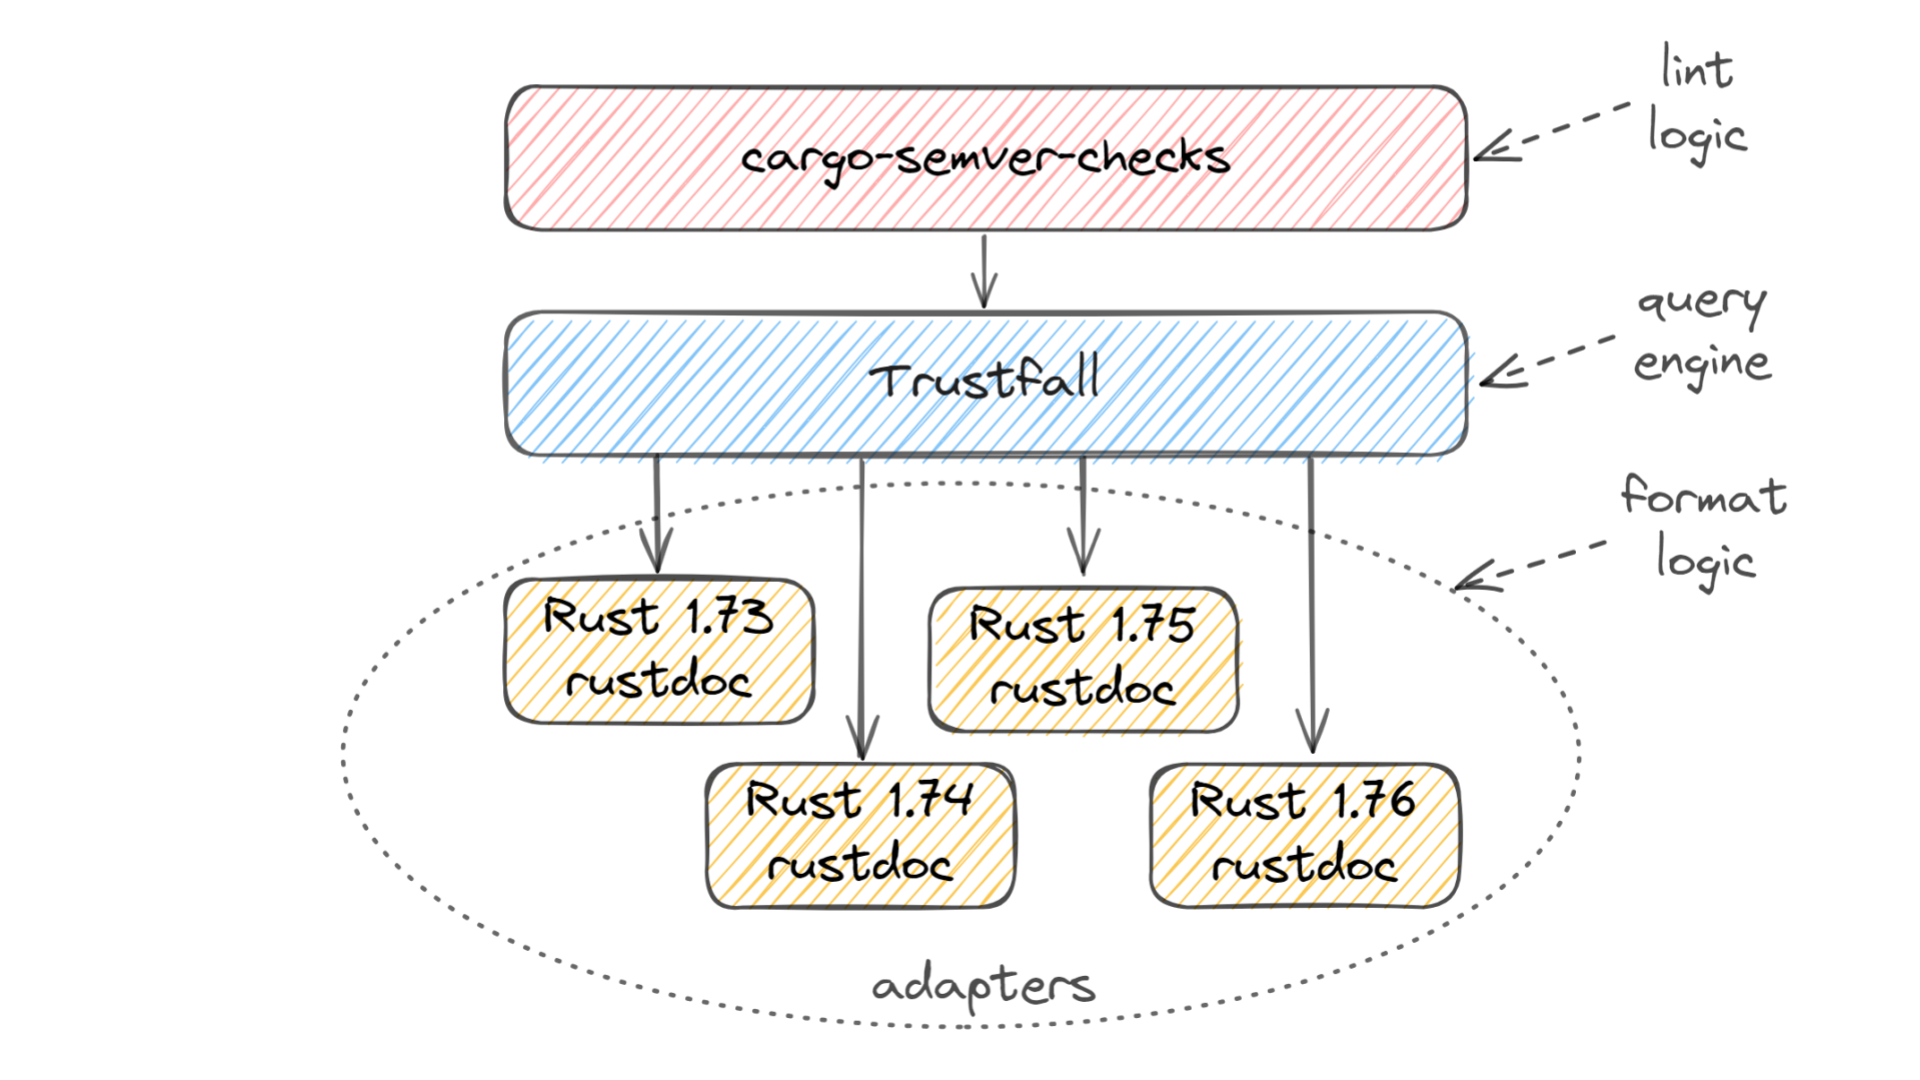 Layer diagram of the cargo-semver-checks architecture. The top layer is titled "cargo-semver-checks" and contains all the lint logic. It's connected to the middle layer, titled "Trustfall" and representing the query engine. That layer in turn is connected to multiple blocks titled "Rust 1.73 rustdoc" through "Rust 1.76 rustdoc", which are collectively titled "adapters" and hold the format-specific logic. The diagram shows that the lint logic is not related at all to the format logic — the cargo-semver-checks lints don't know anything about the format of the data they are querying!